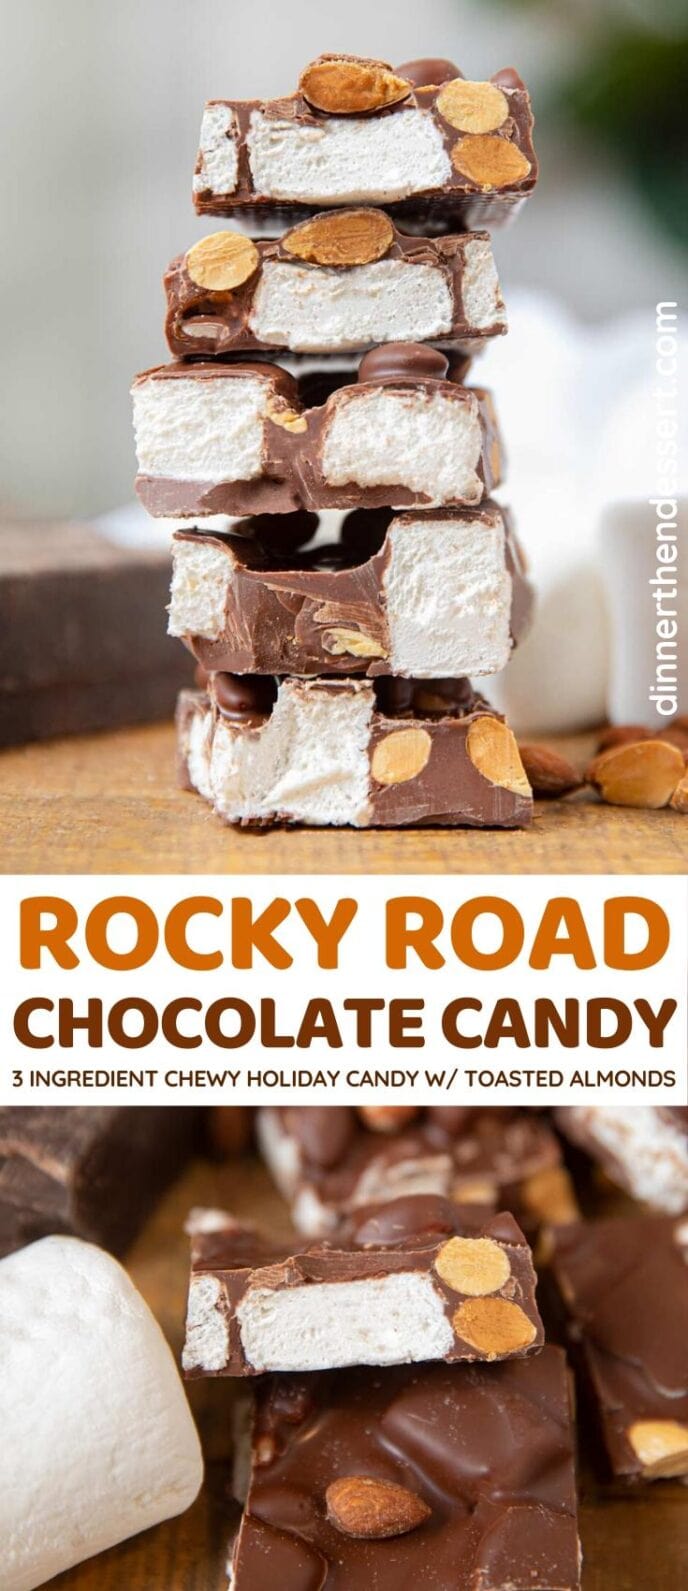 Rocky Road Chocolate Candy collage